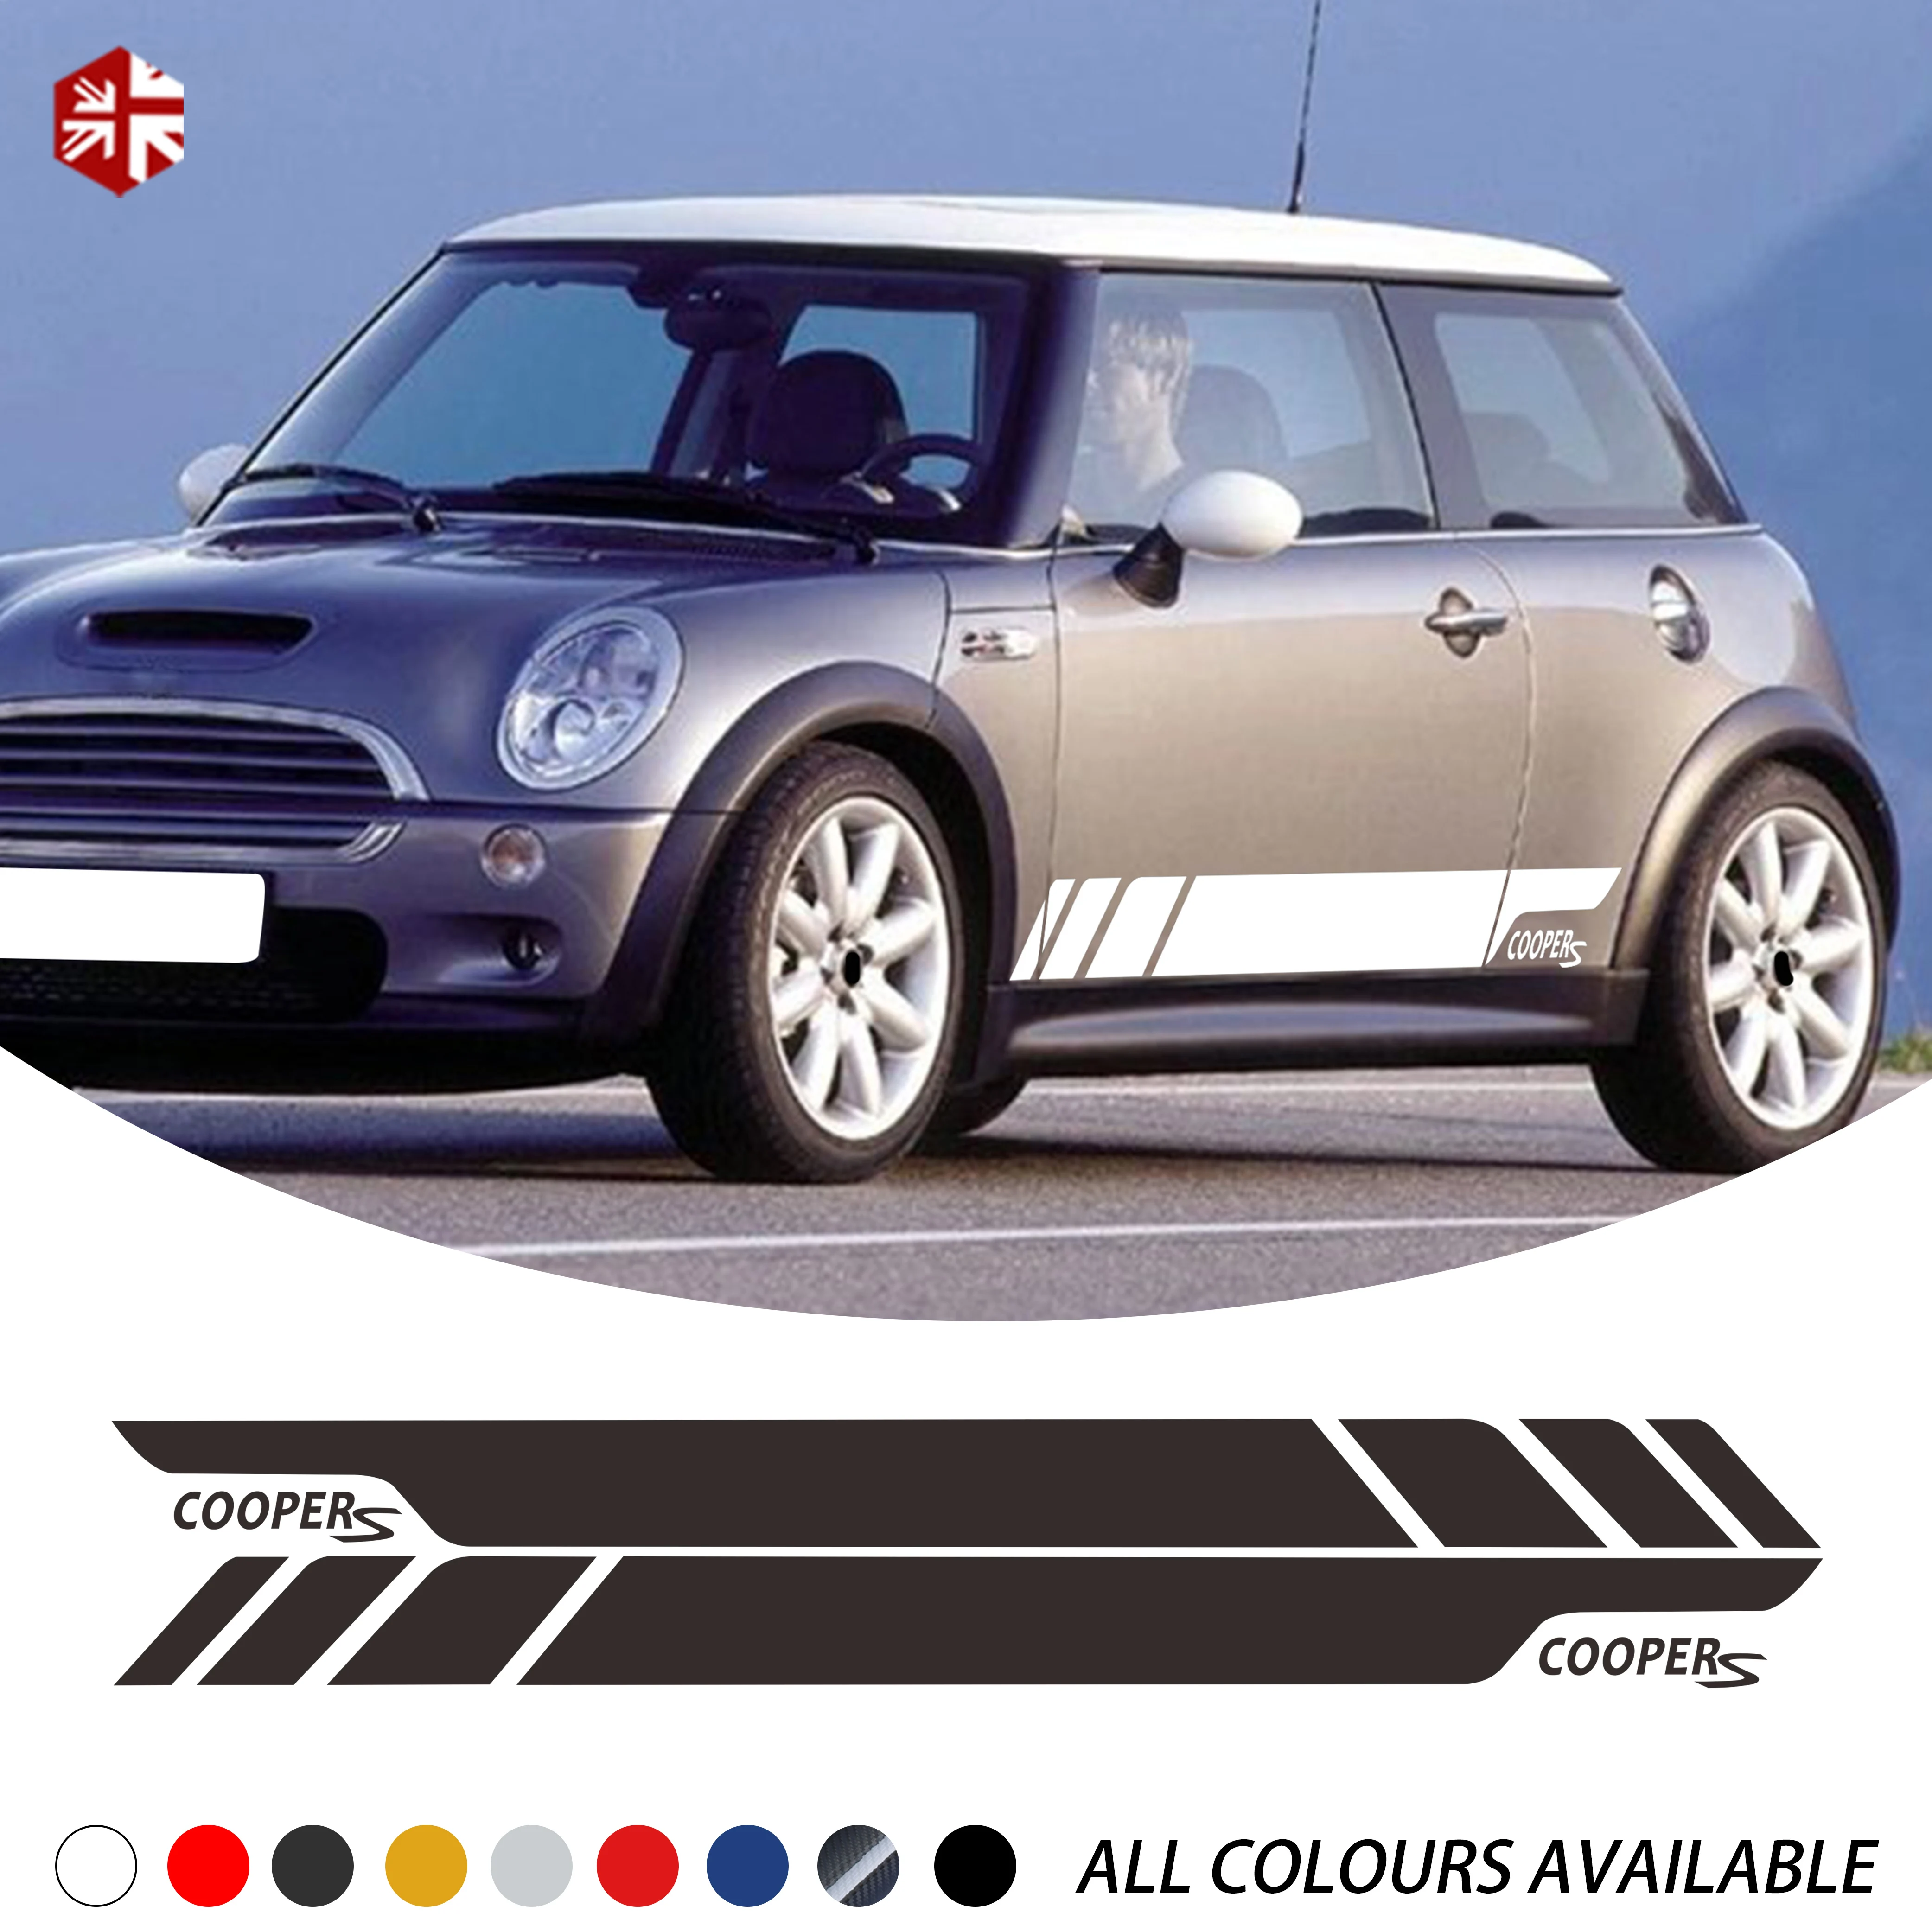 2 Pcs Car Styling Cooper S Graphics Vinyl Decal Racing Door Side Stripes Sticker For MINI Cooper S R50 R52 R53 One Accessories